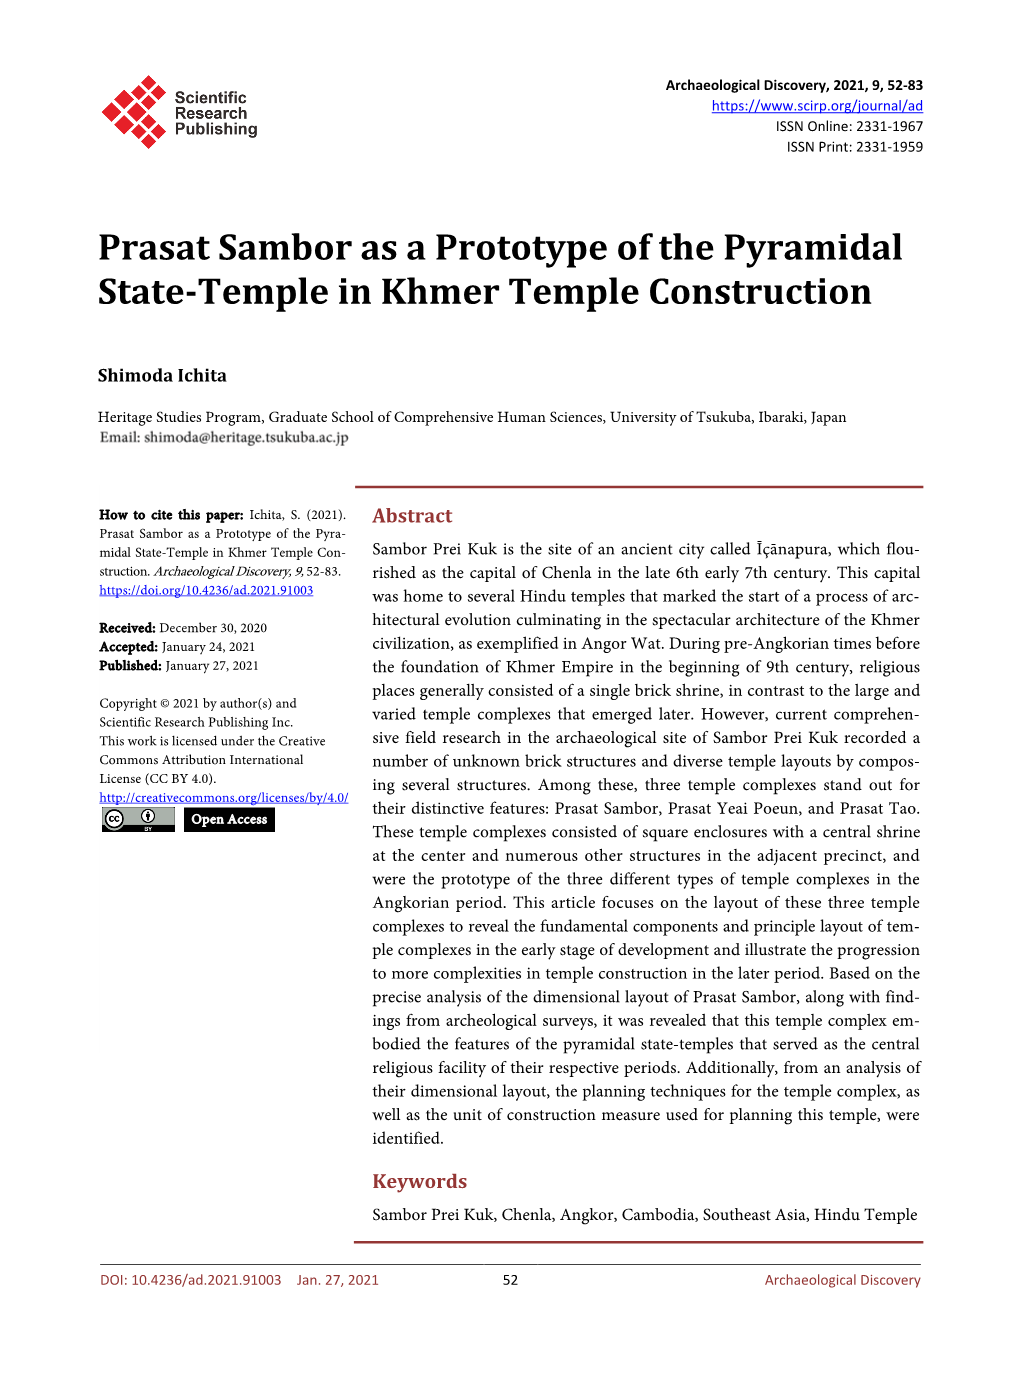 Prasat Sambor As a Prototype of the Pyramidal State-Temple in Khmer Temple Construction